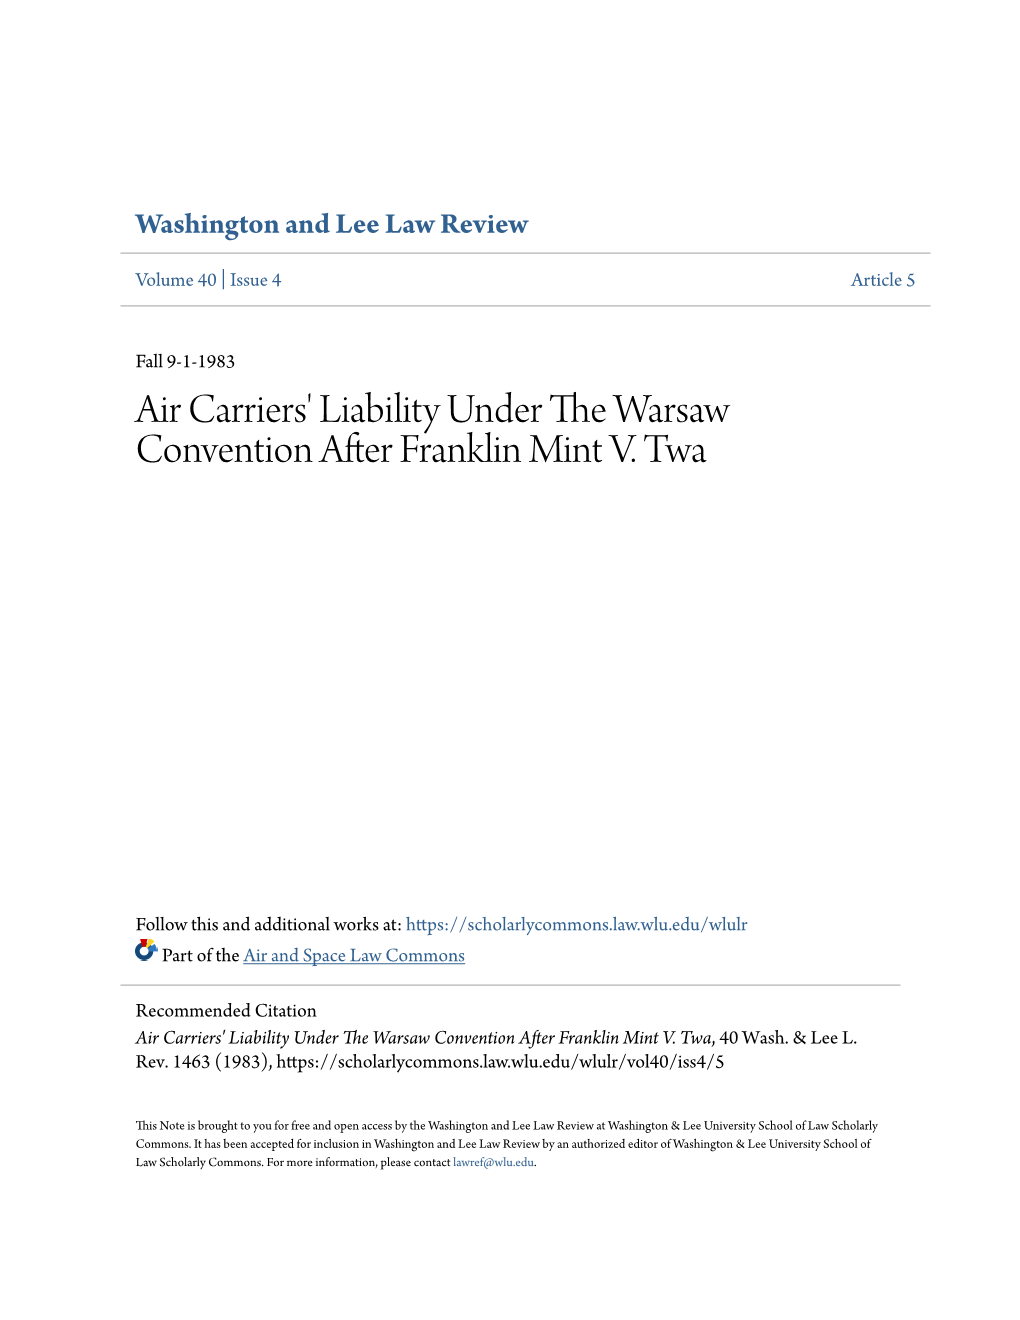 Air Carriers' Liability Under the Warsaw Convention After Franklin Mint V. Twa, 40 Wash